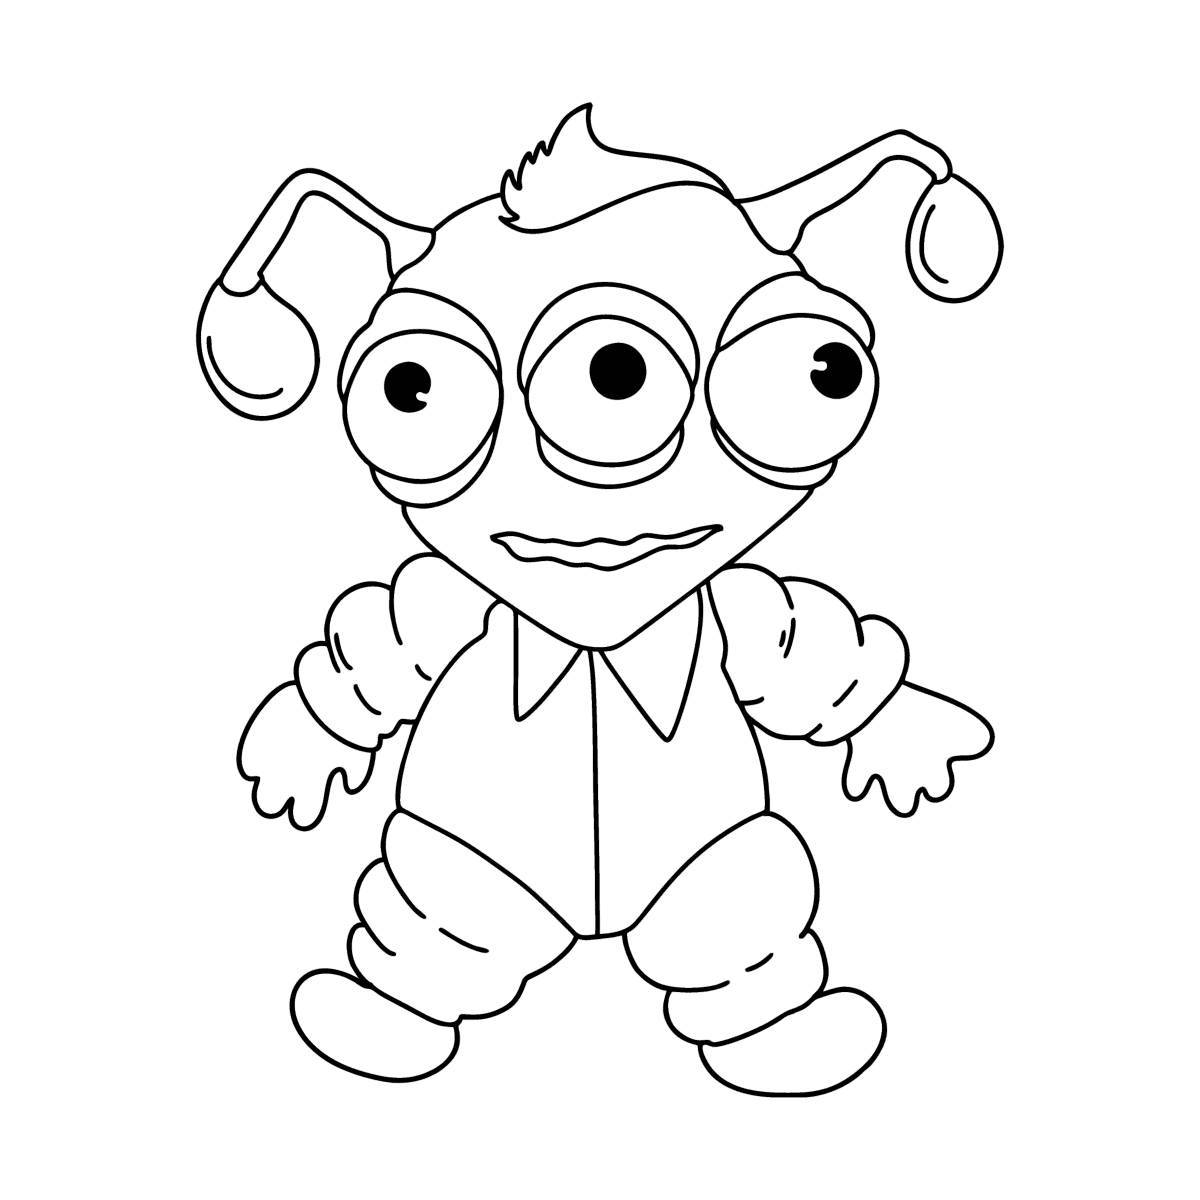 Glitter alien coloring page